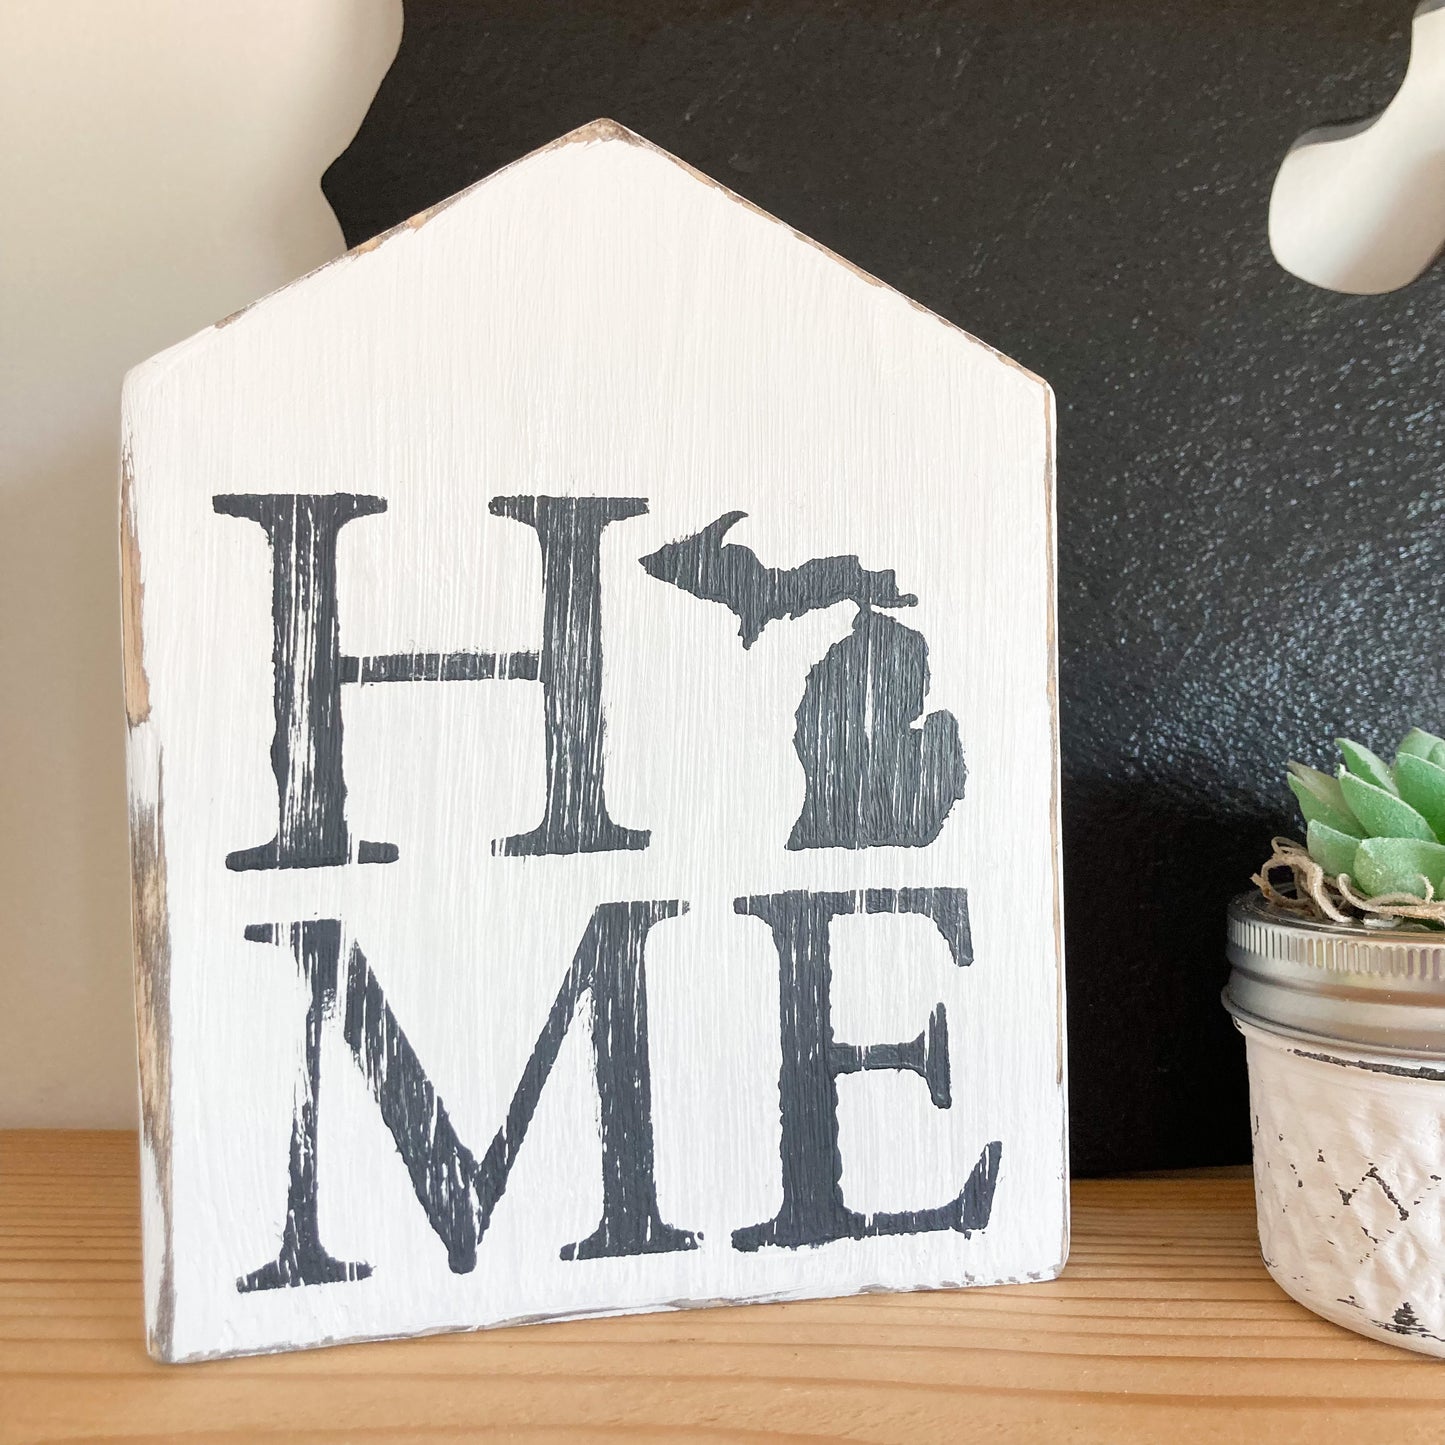 Handmade wood shaped distressed house painted white displaying word home with state of Michigan as the o painted in black approximatly 7 inches by 5 inches by 1.5 inches thick free standing shelf sitter